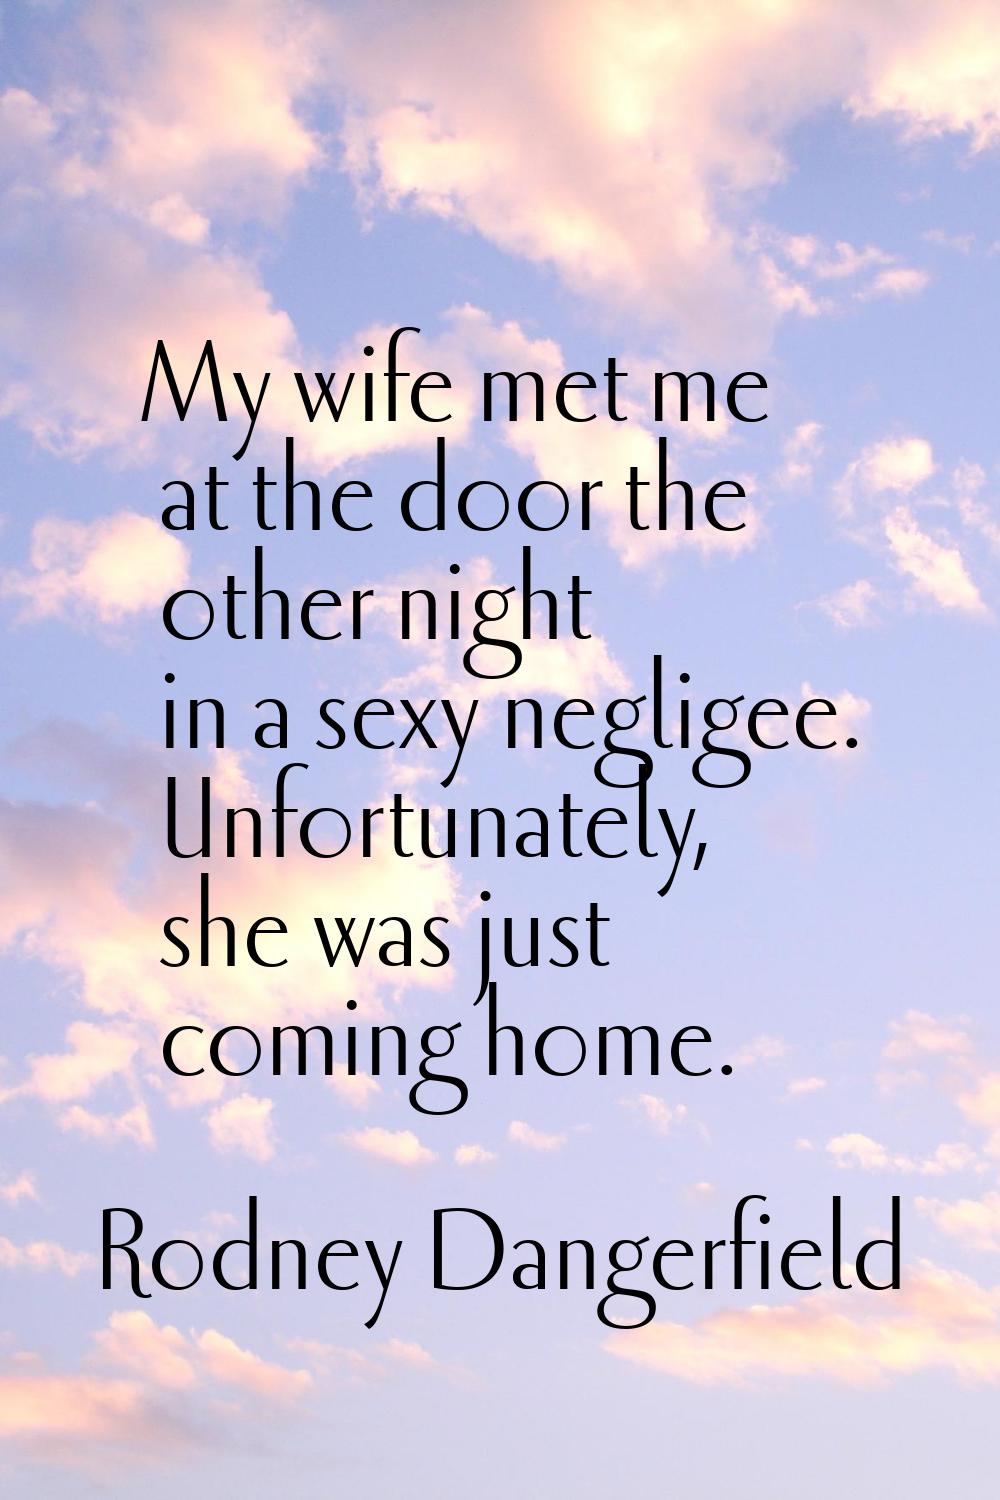 My wife met me at the door the other night in a sexy negligee. Unfortunately, she was just coming h